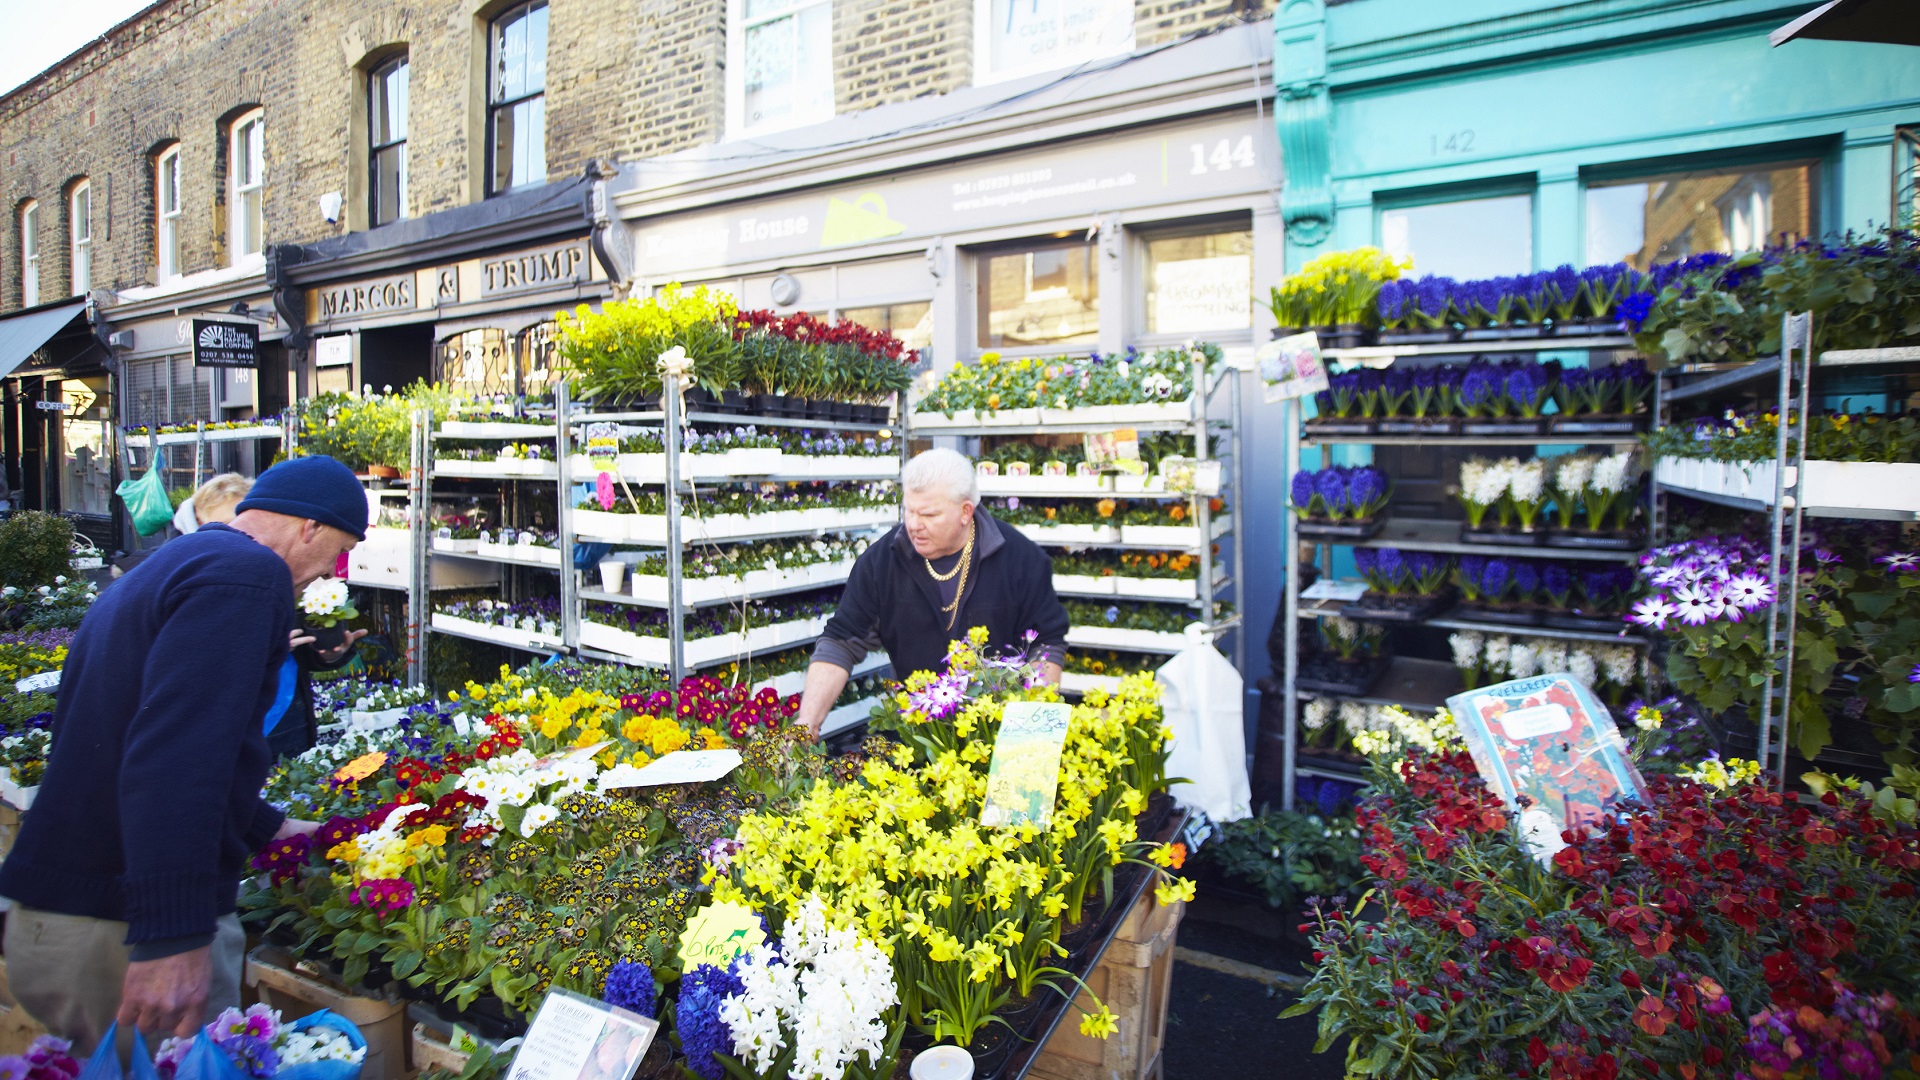 Market seller surrounded by daffodils and other plants at Columbia Road Flower Market